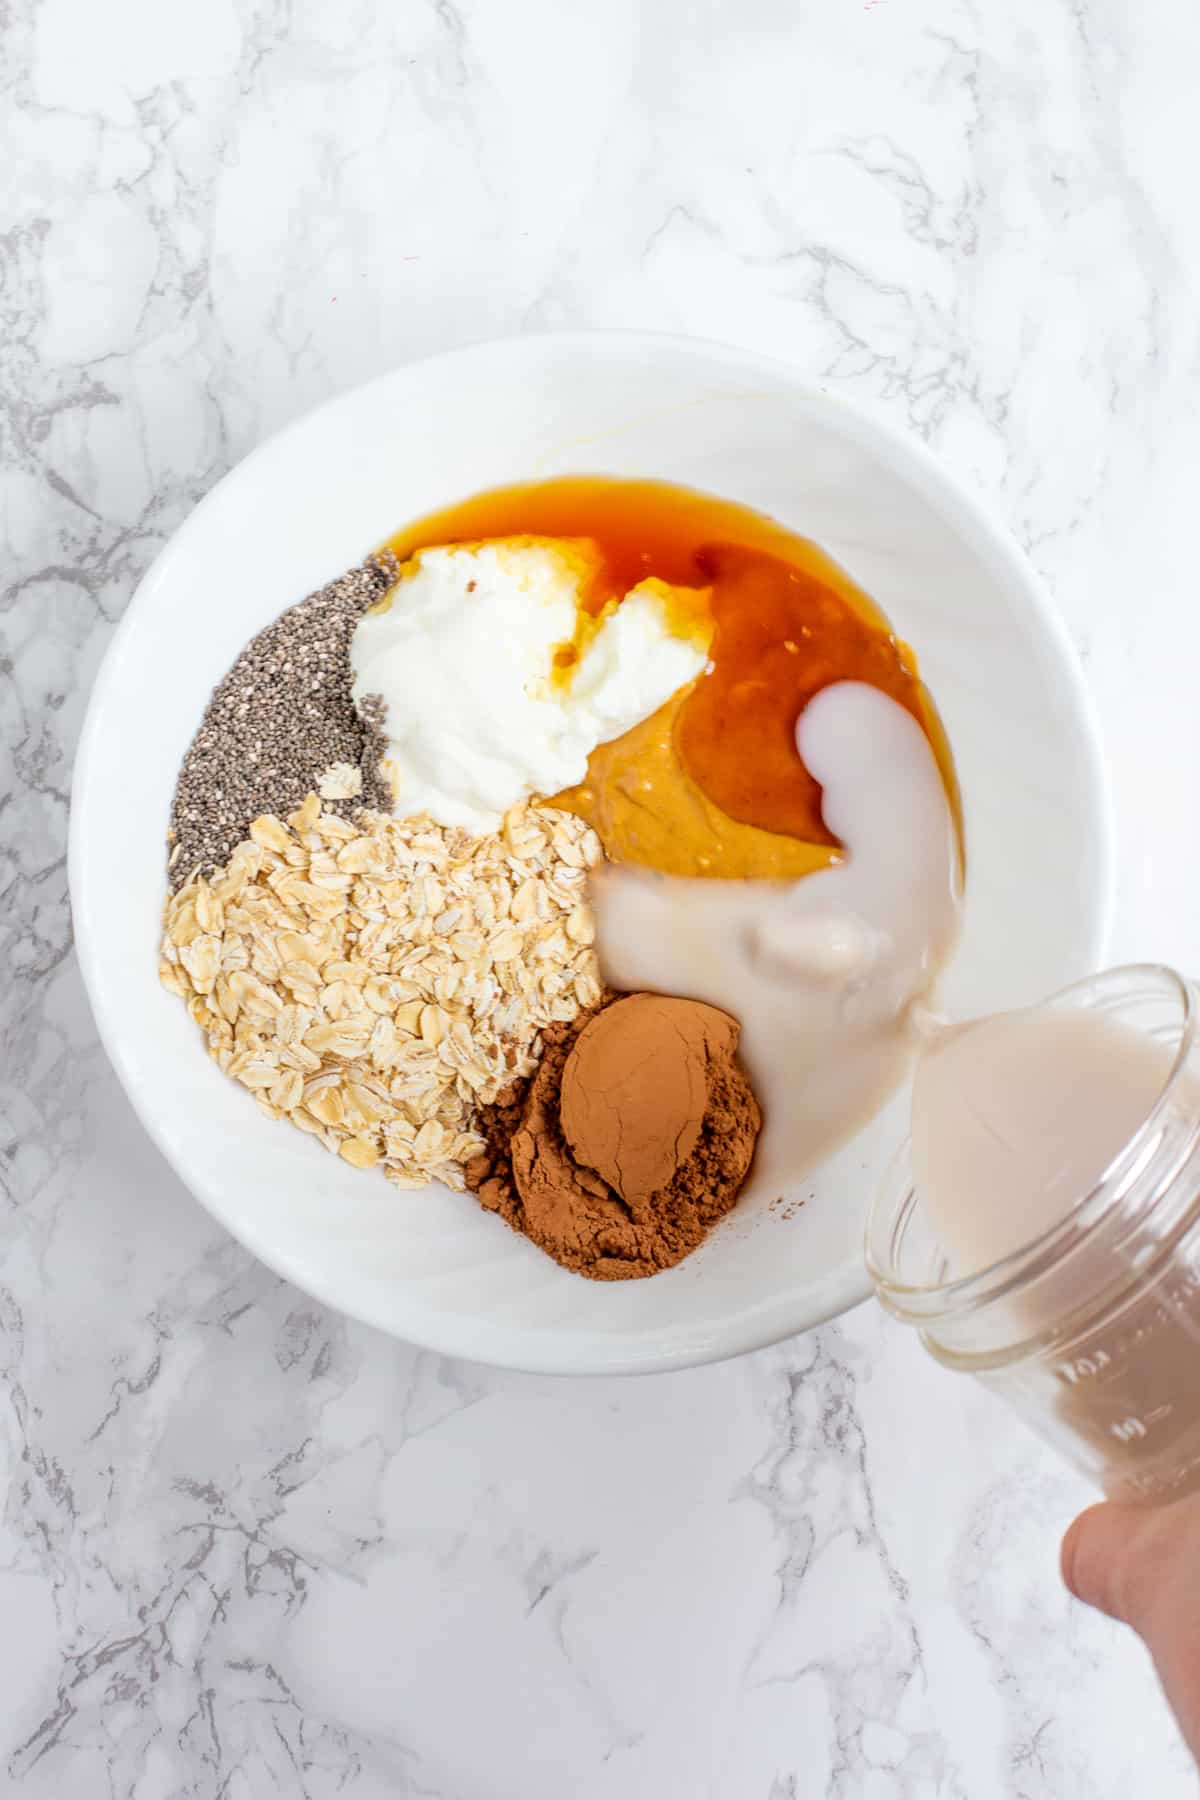 Ingredients in a white bowl - rolled oats, cocoa powder, peanut butter, yogurt, chia seeds, and milk.